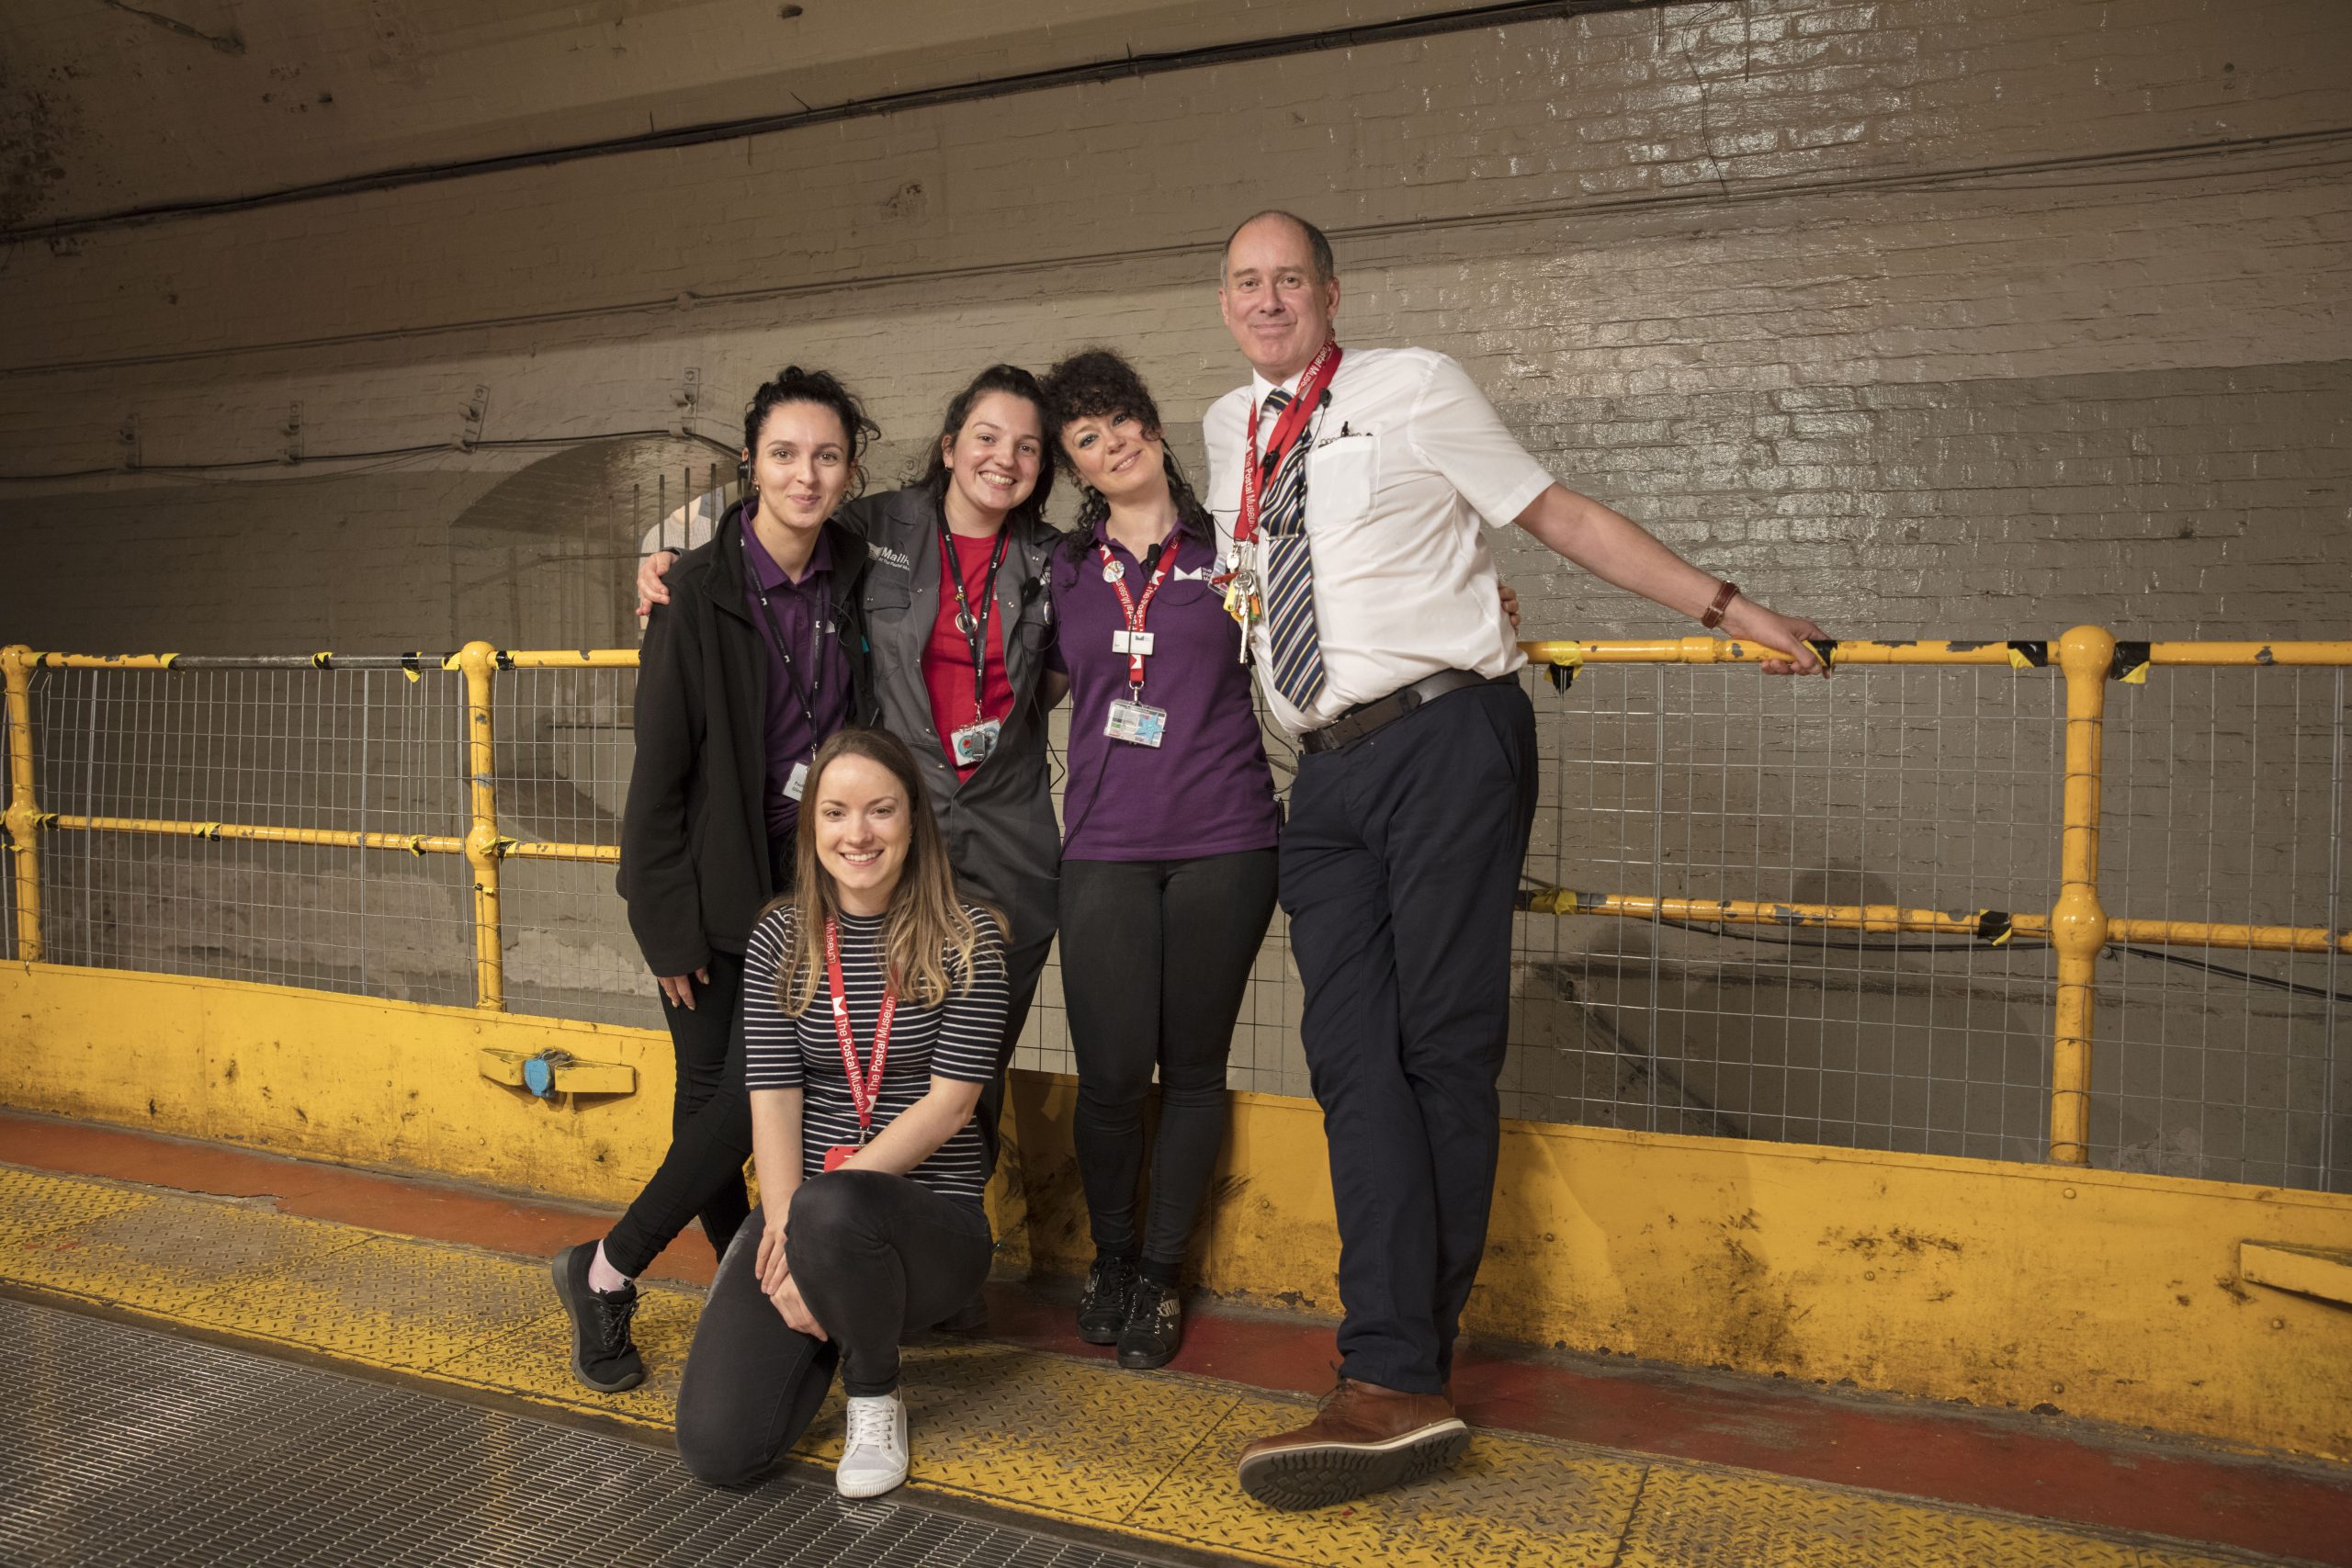 Five members from our Visitor Experience team posing for a photograph